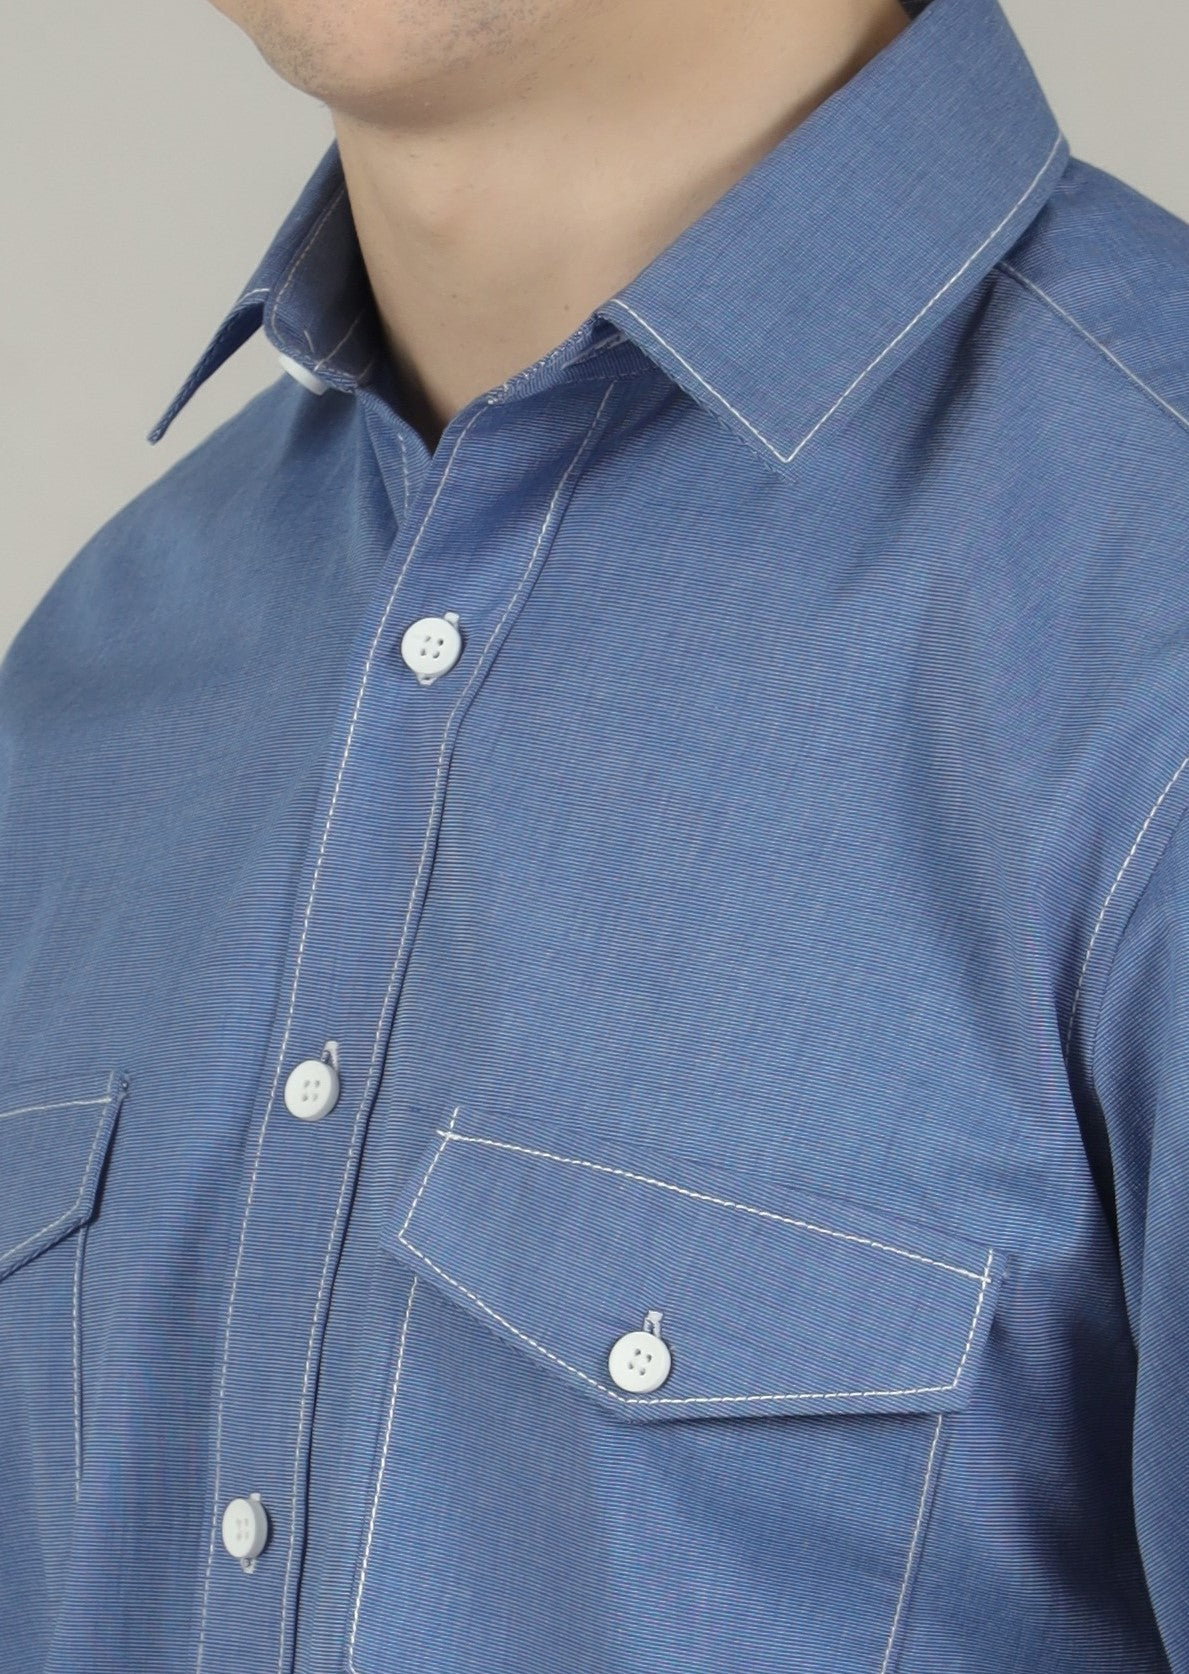 Bright Blue Chambray Men's Shirt in  Cotton with Double Pockets & Contrast Stitch - OZMOD